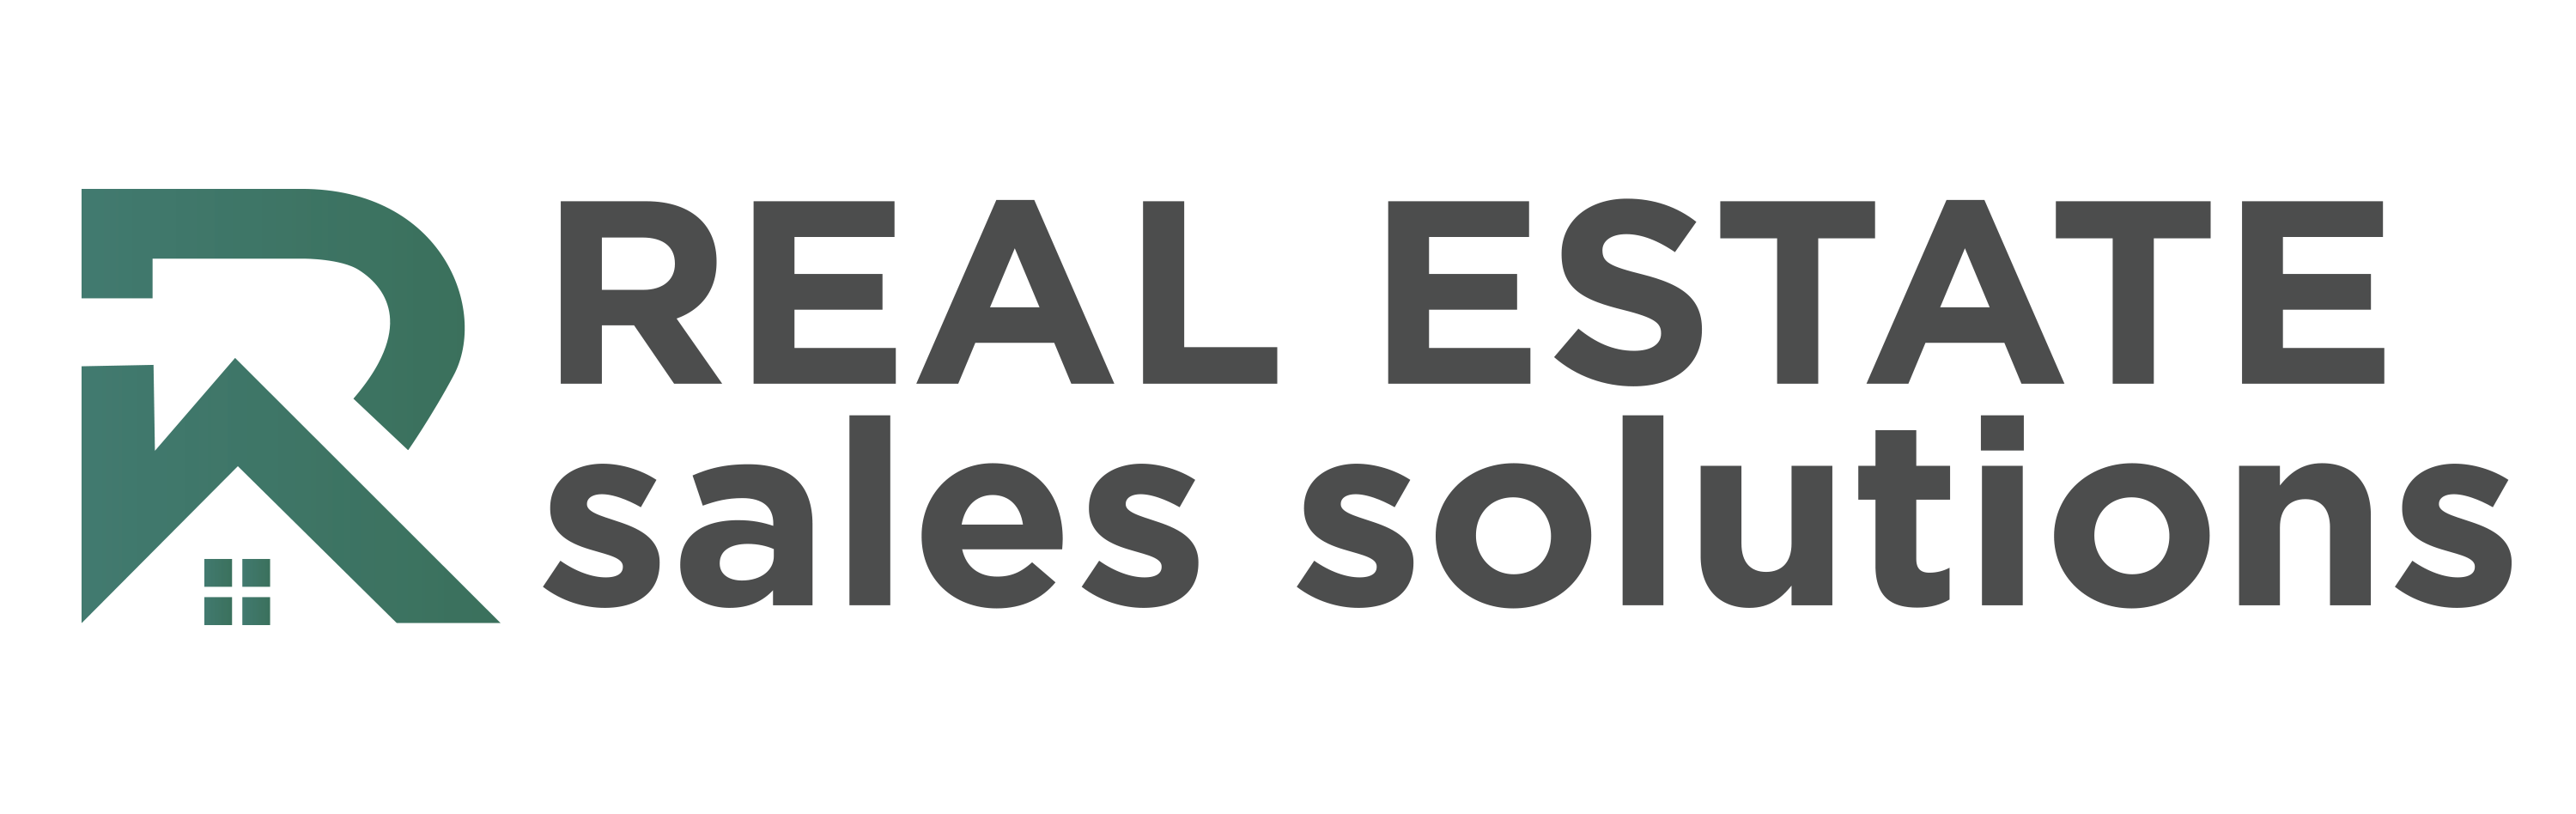 Real Estate Sales Solutions